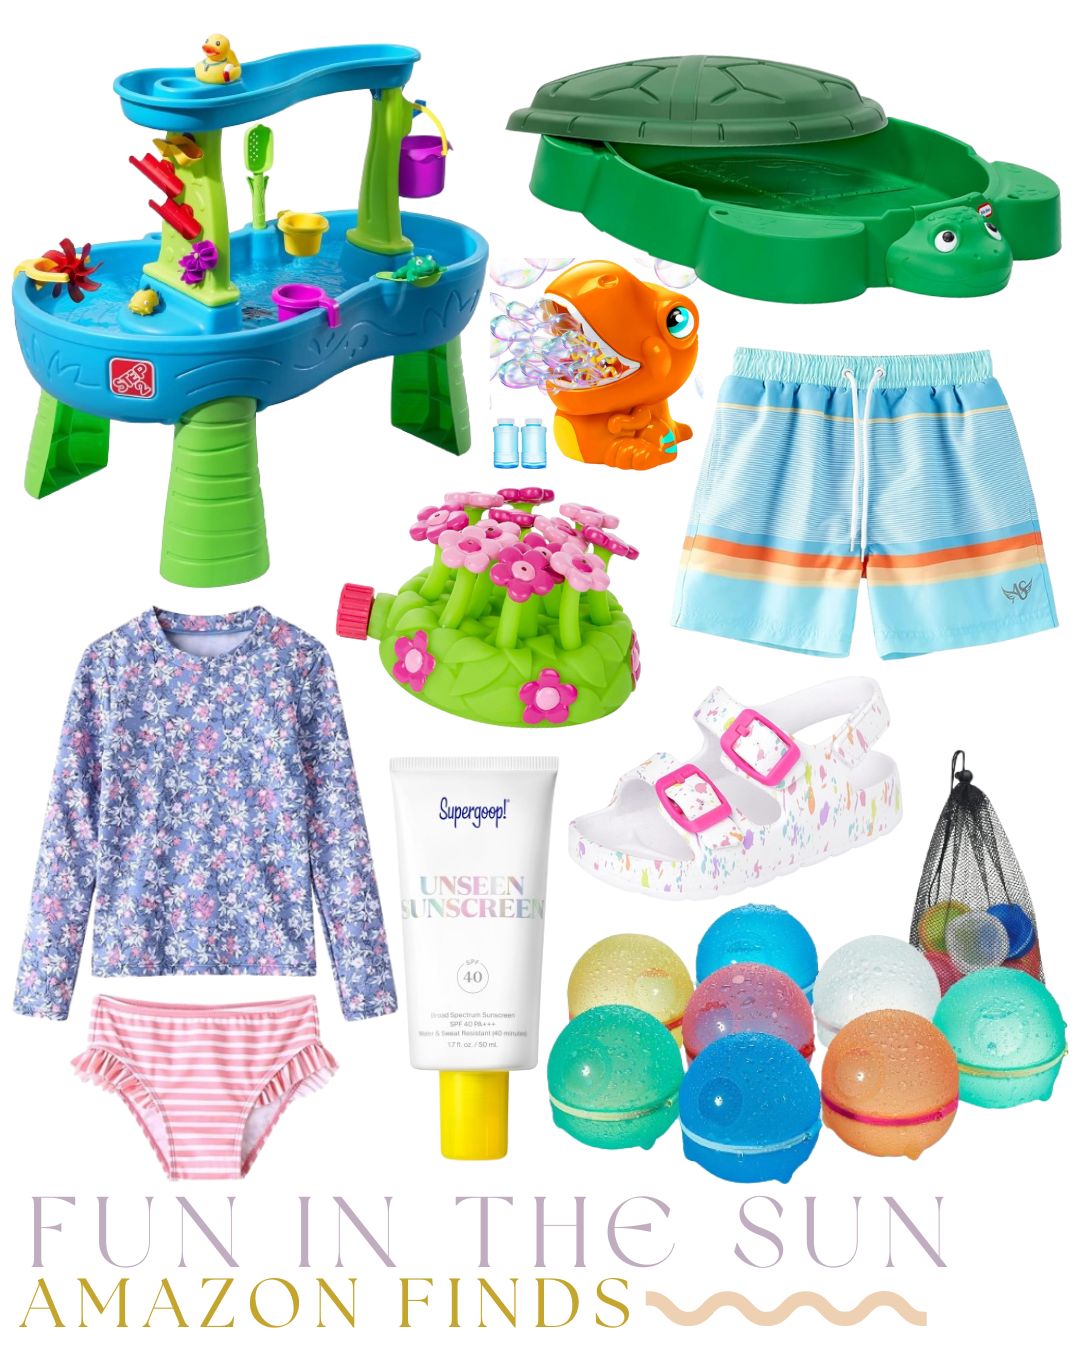 Toddler fun in the sun! Summertime essentials for kids outdoor play. Posted today | Amazon (US)